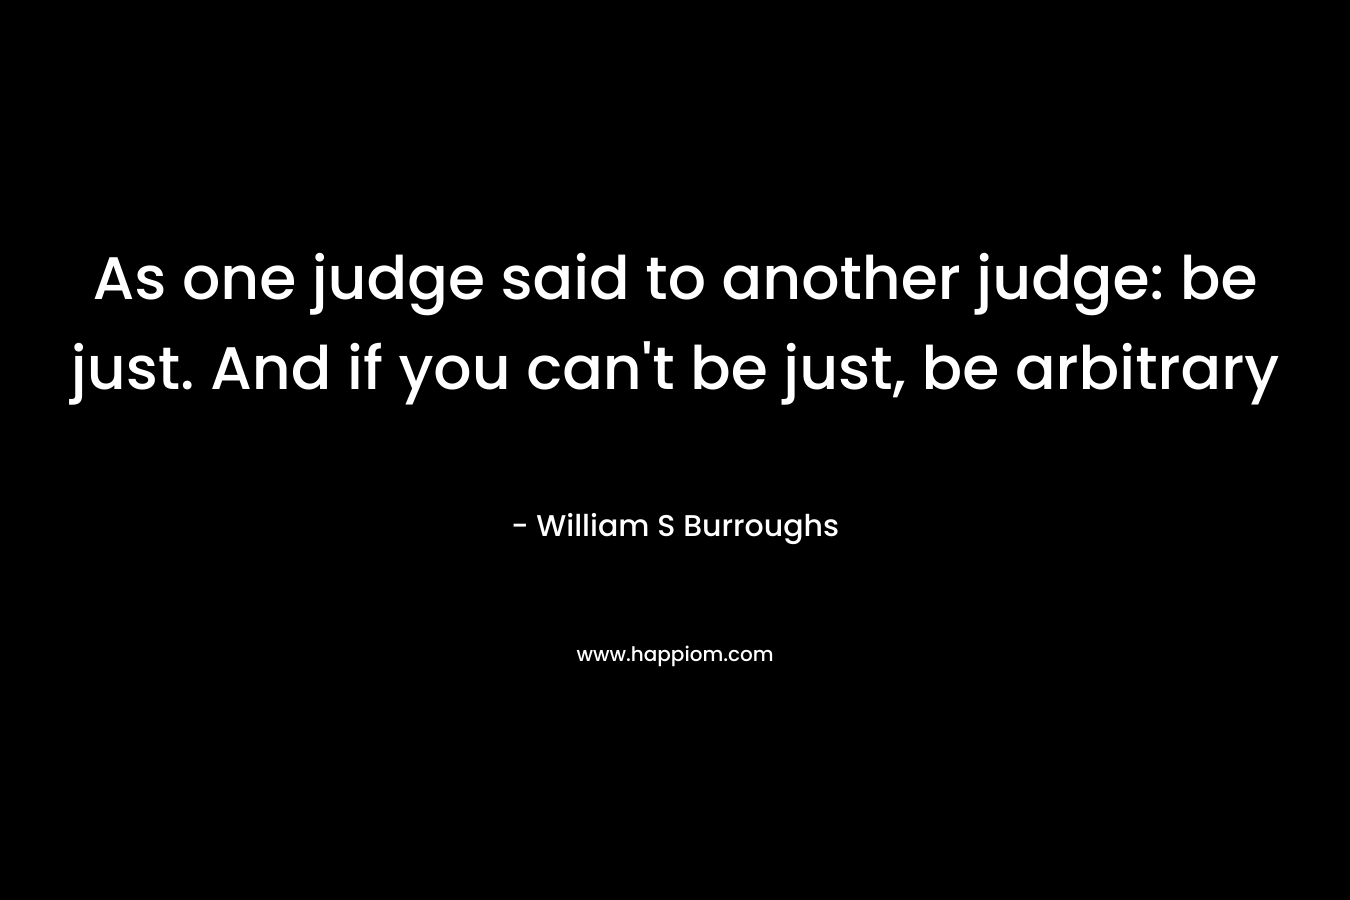 As one judge said to another judge: be just. And if you can't be just, be arbitrary